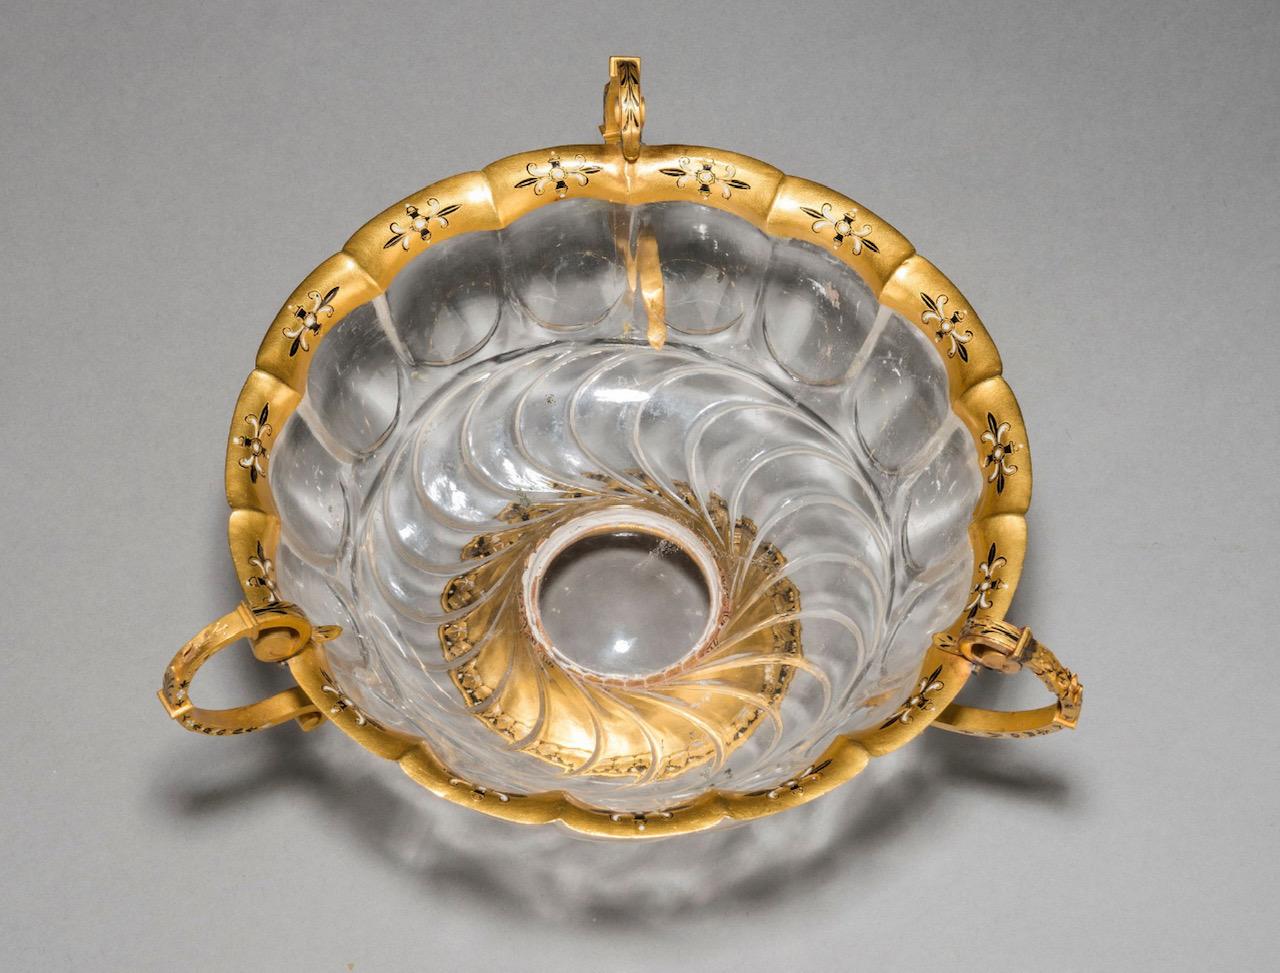 Exquisite 13th Century Rock Crystal and Gold Bowl in Superb Condition For Sale 2